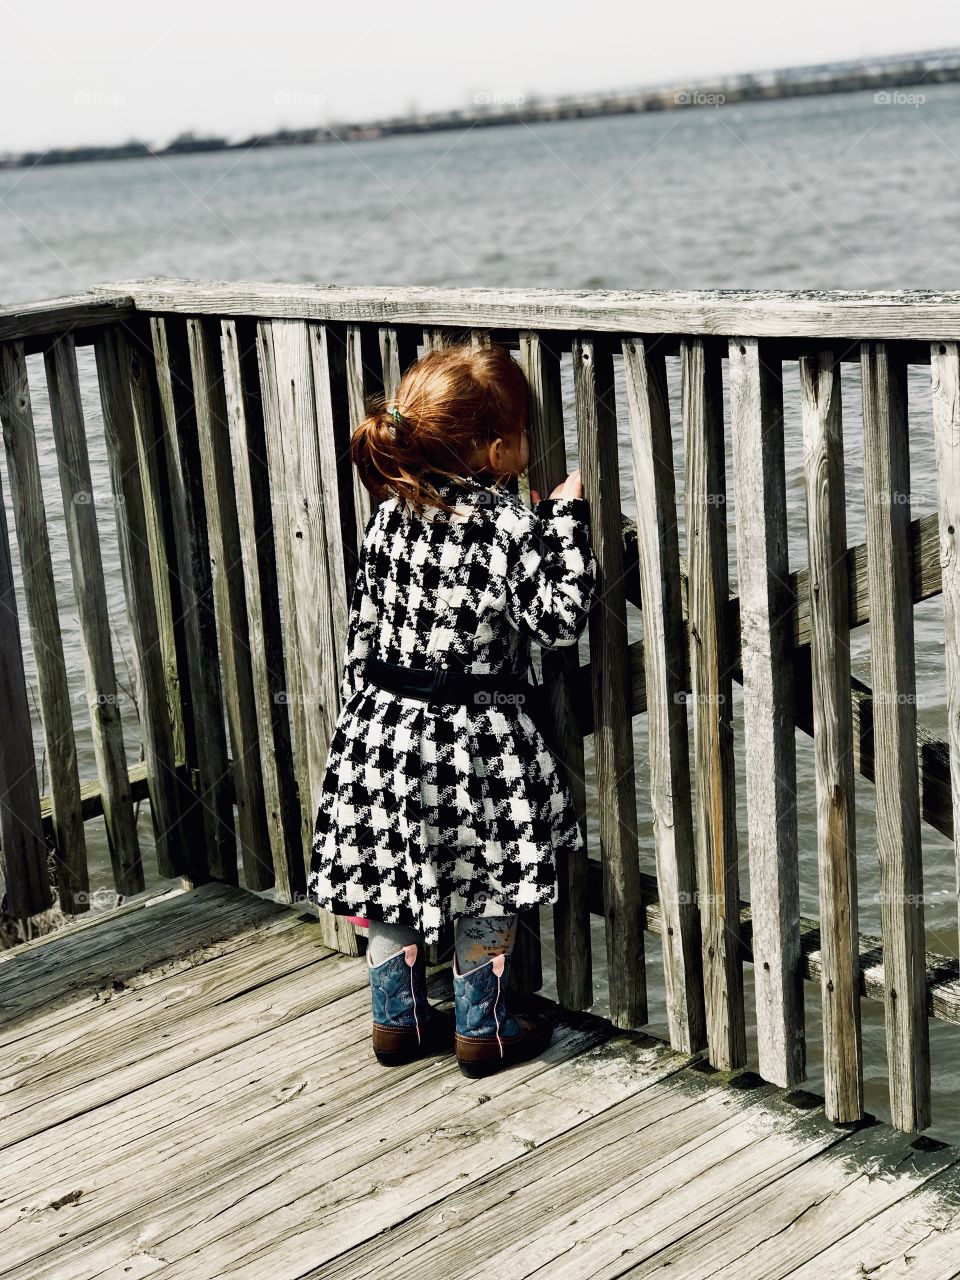 My adorable daughter looking through the bars peering out at the river crashing along the shore. 